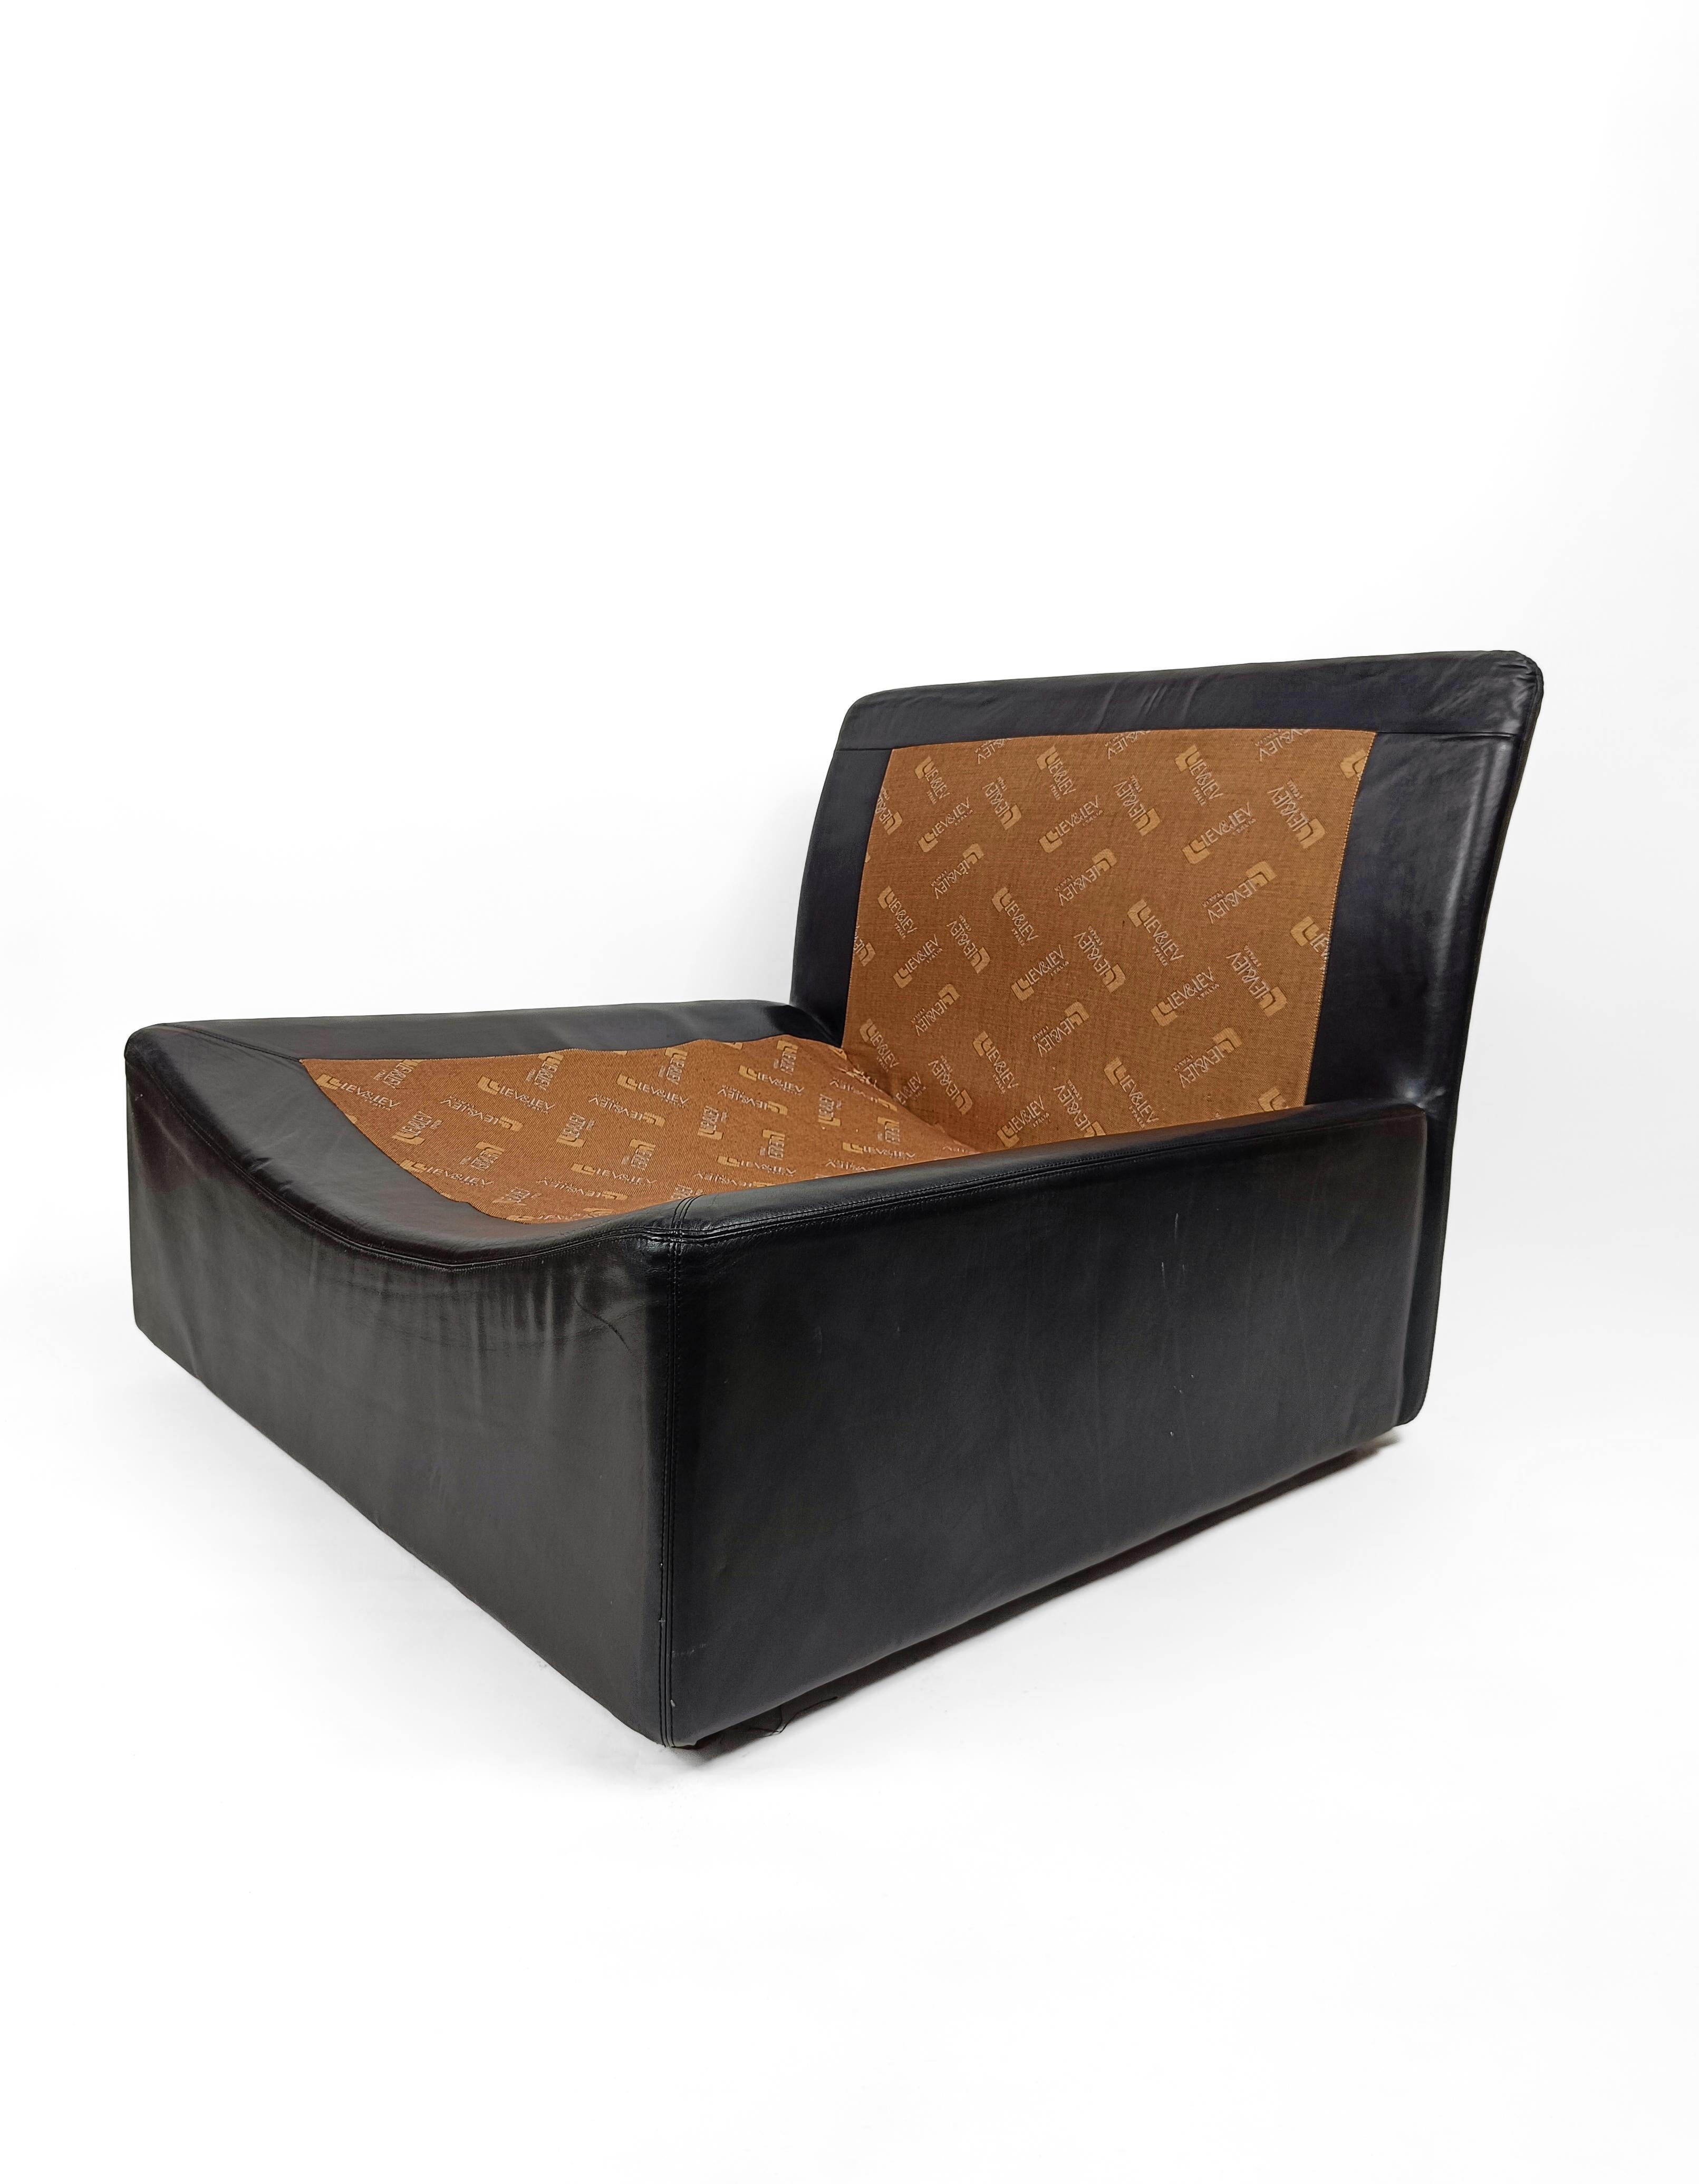 Italian Modular Lounge Chair in Black Leather model PANAREA by Lev & Lev, 1970s  For Sale 3